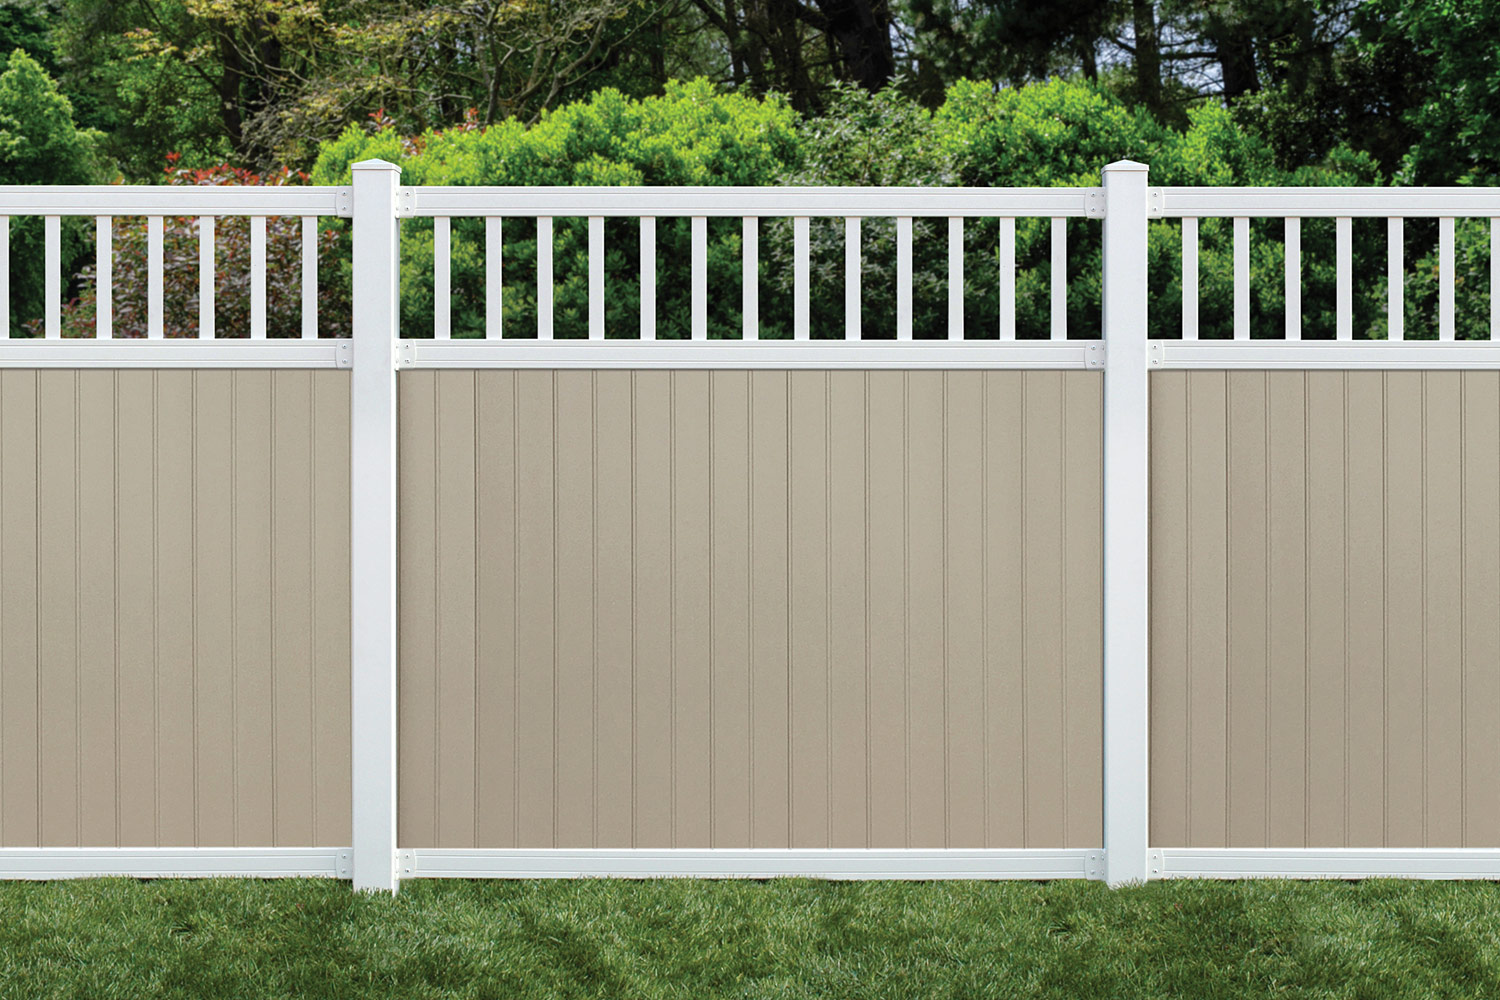 Sixth Avenue Building Products Belfast Spindle Top Fence - Tan-White